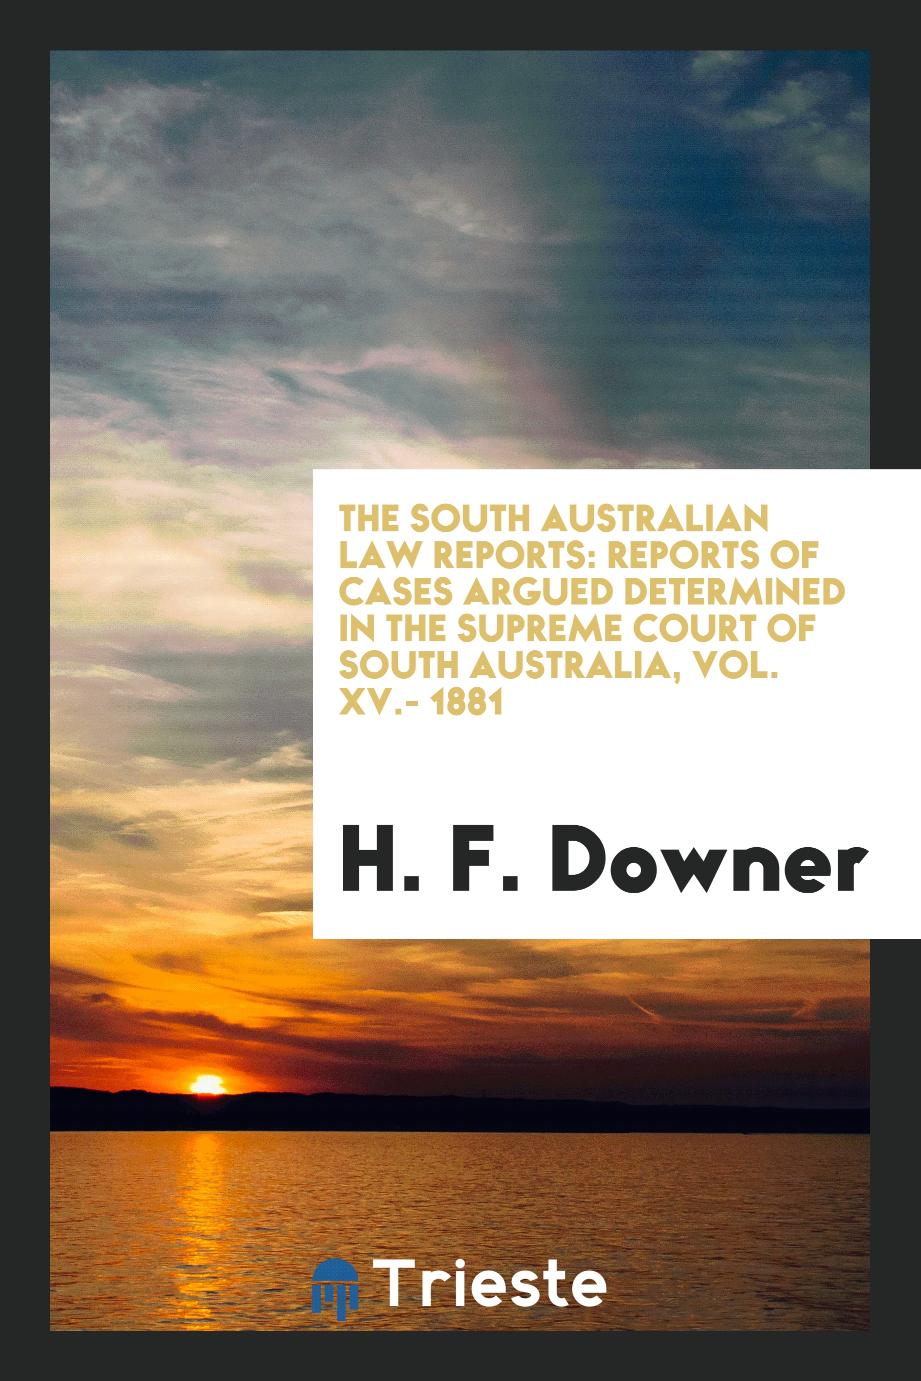 The South Australian Law Reports: Reports of Cases Argued Determined in the Supreme Court of South Australia, Vol. XV.- 1881